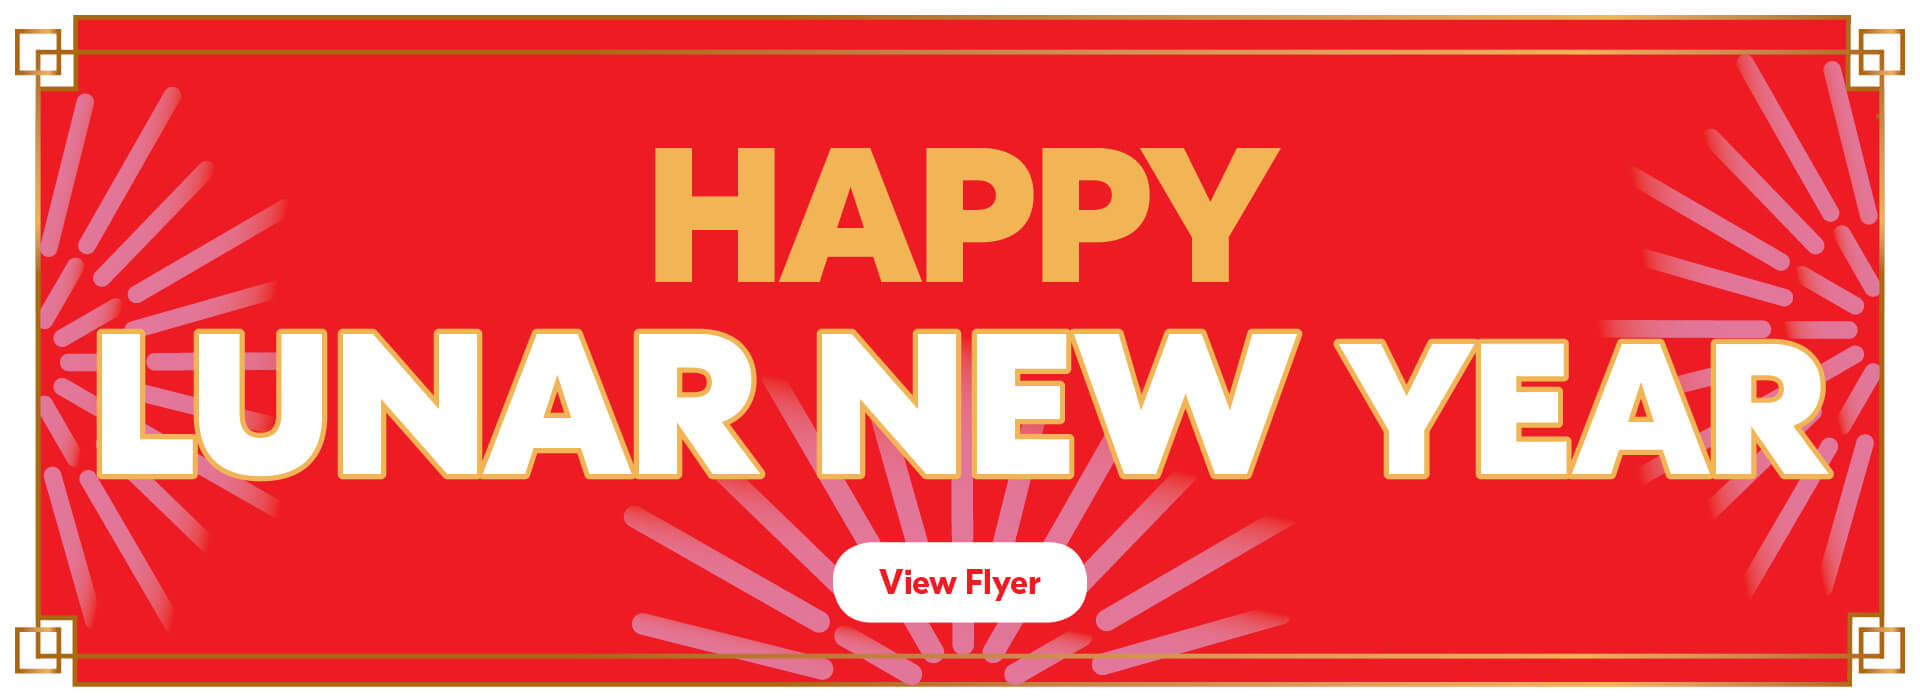 Text Reading 'Lunar New Year' with a 'View flyer' button below.